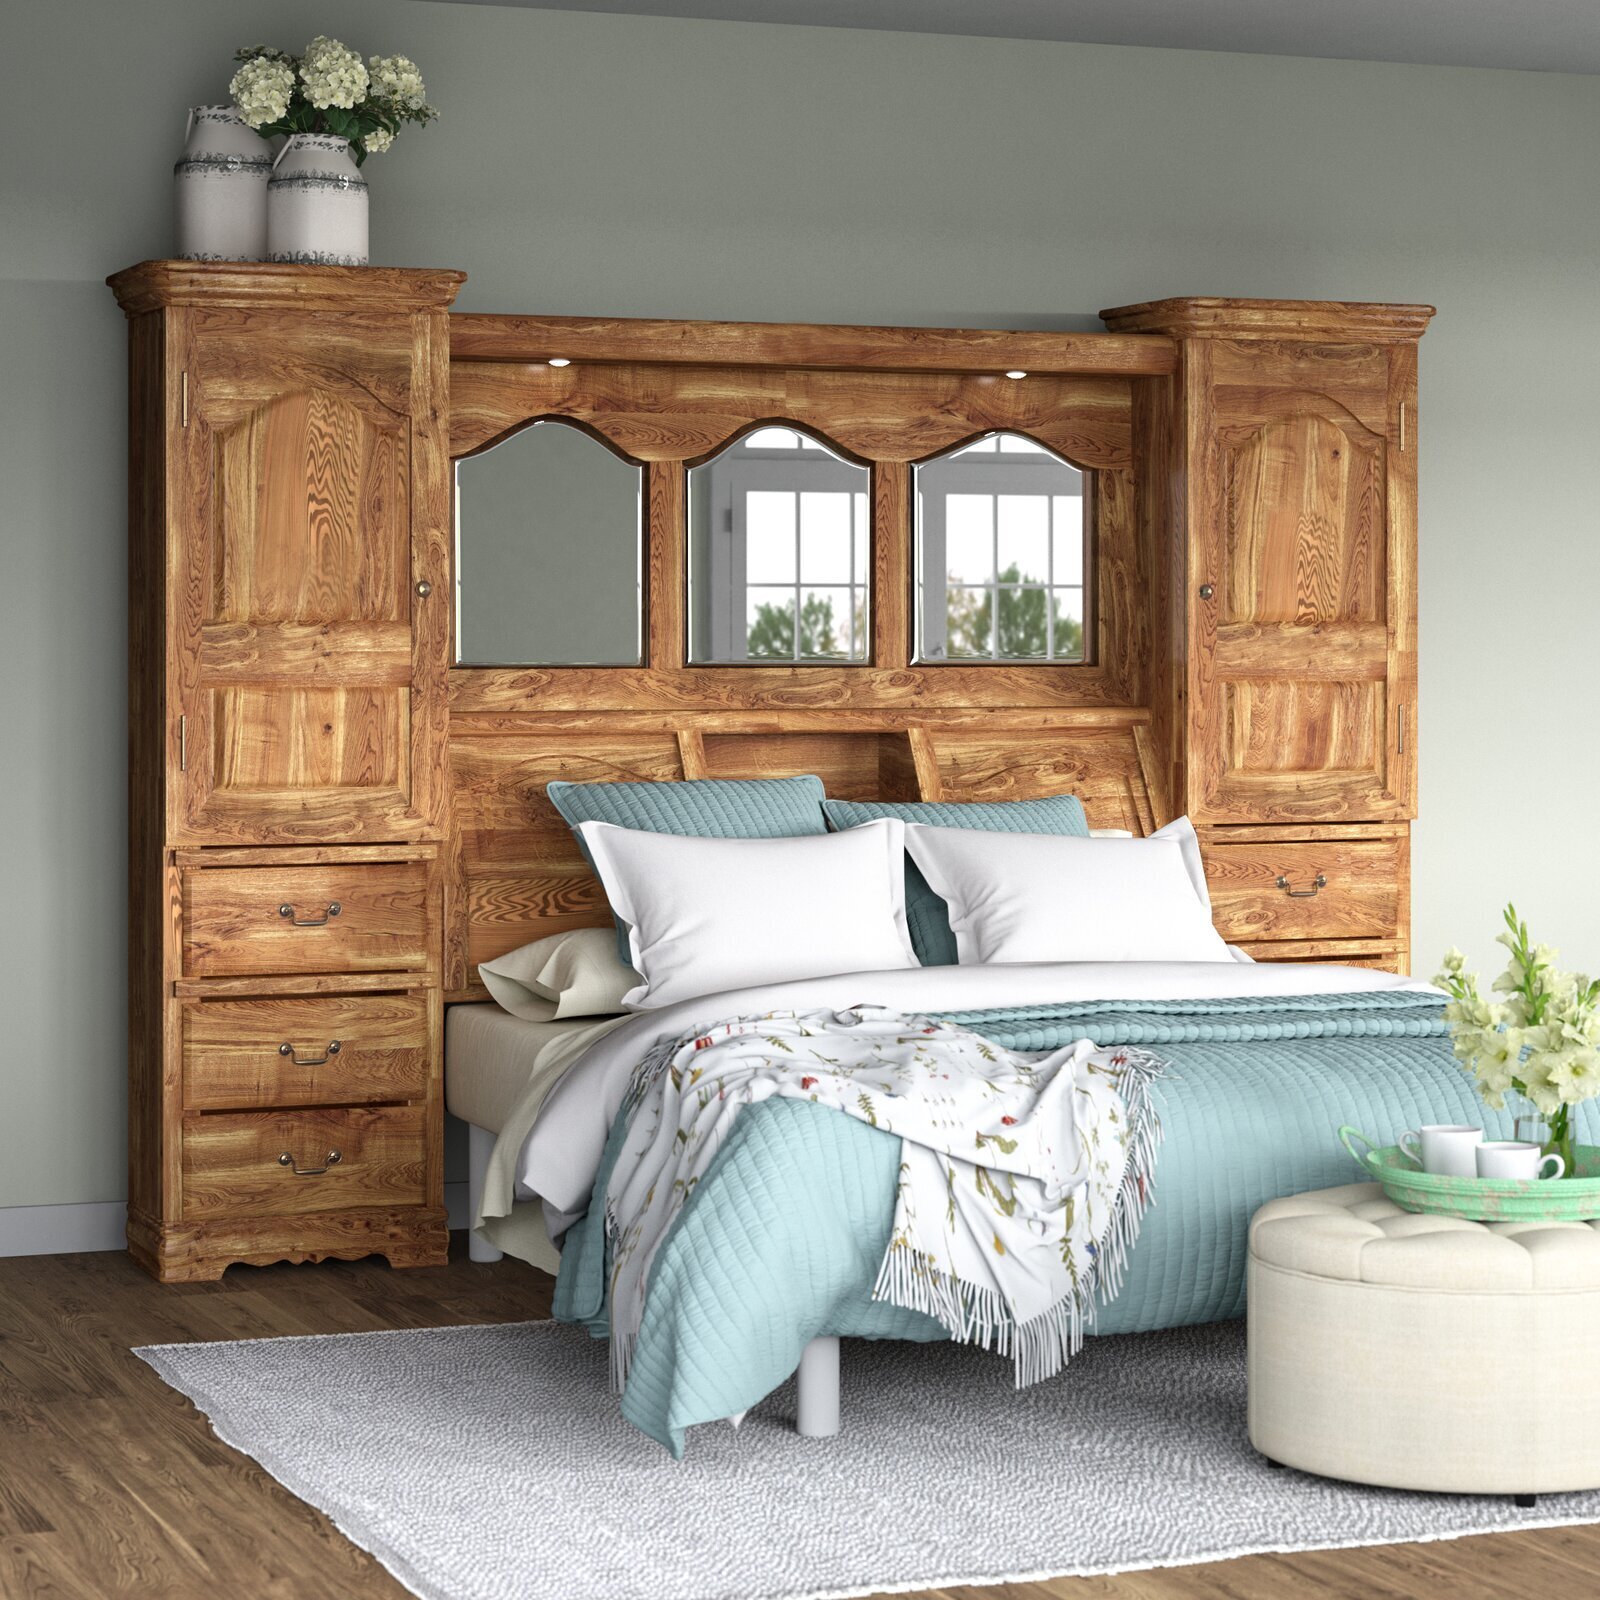 Large headboard with hidden cabinets, drawers, and shelves 